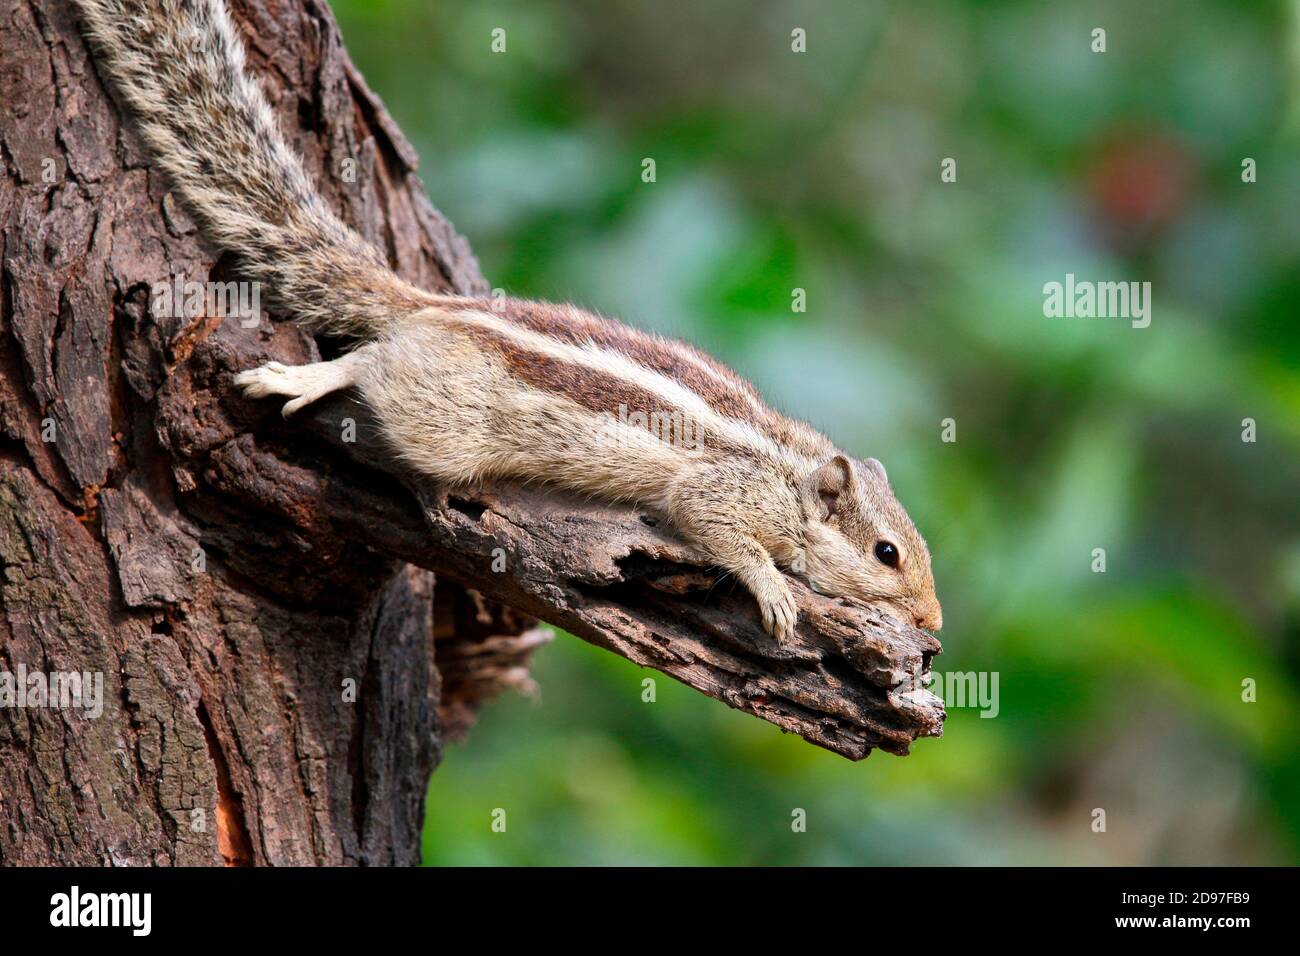 Northern palm squirrel (Funambulus pennantii) adult on an observing trunk, Northwest India Stock Photo